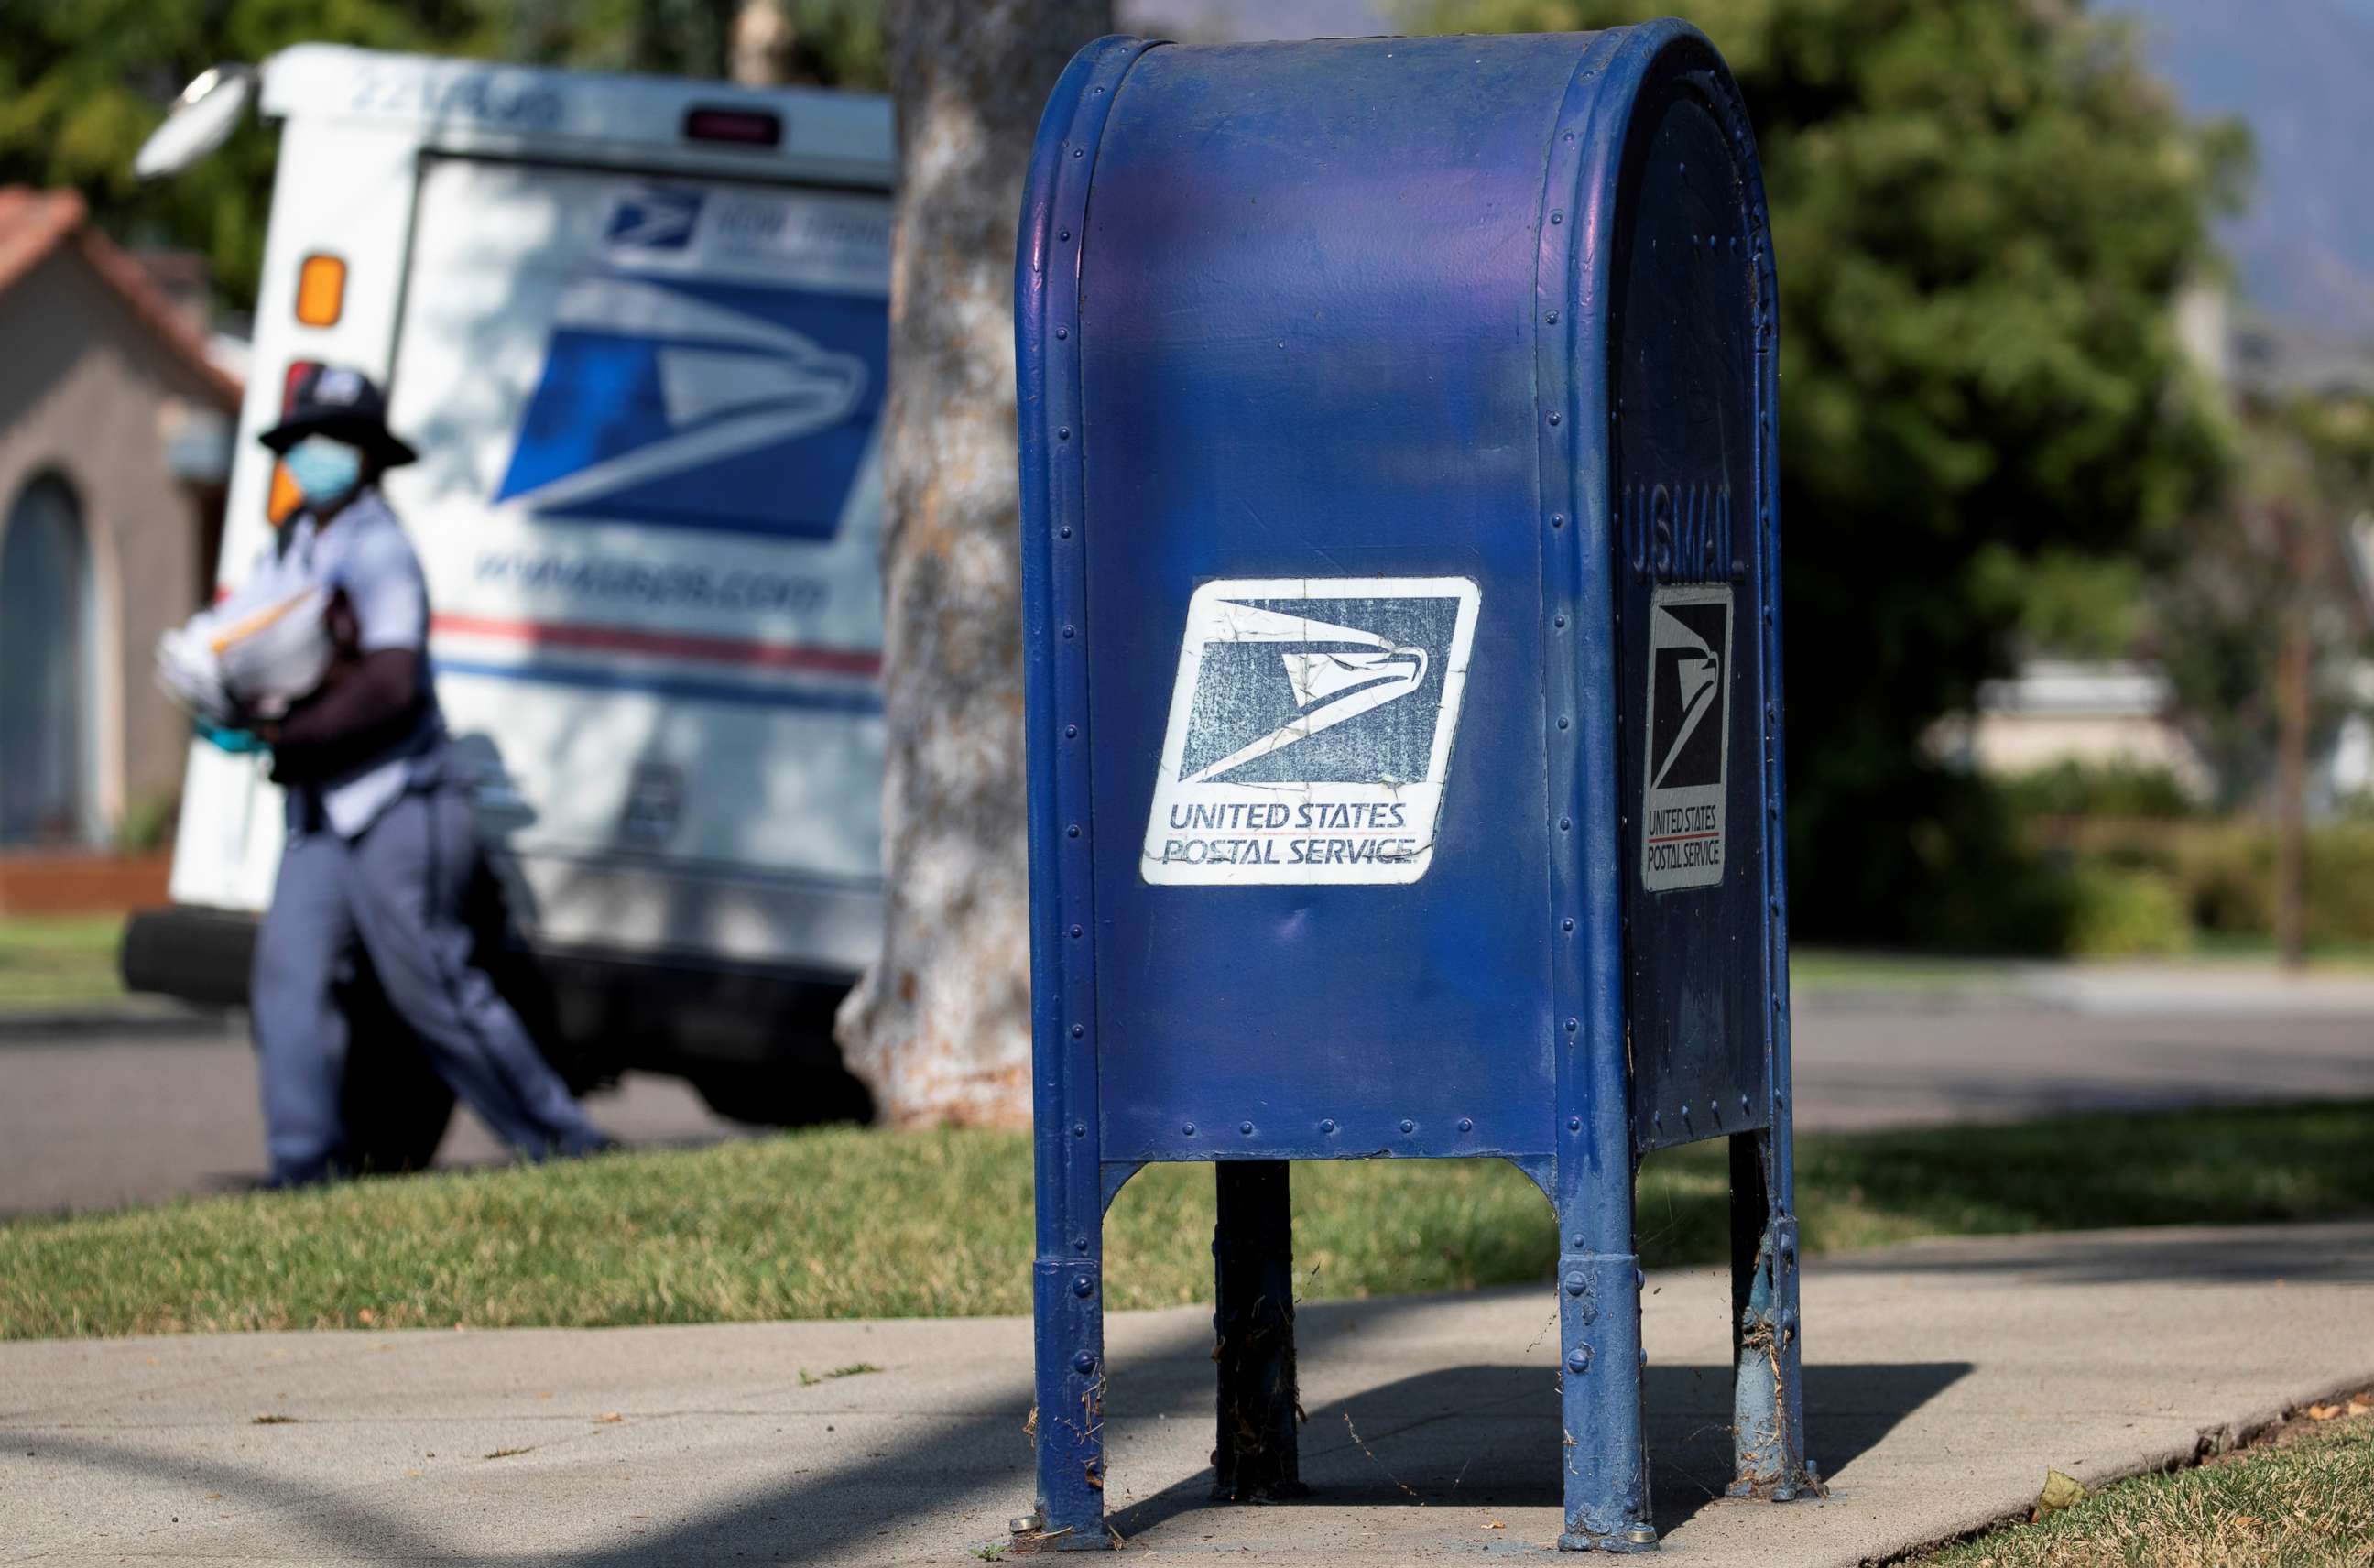 PHOTO: A United States Postal Service (USPS) mailbox is pictured in Pasadena, California, Aug. 17, 2020.